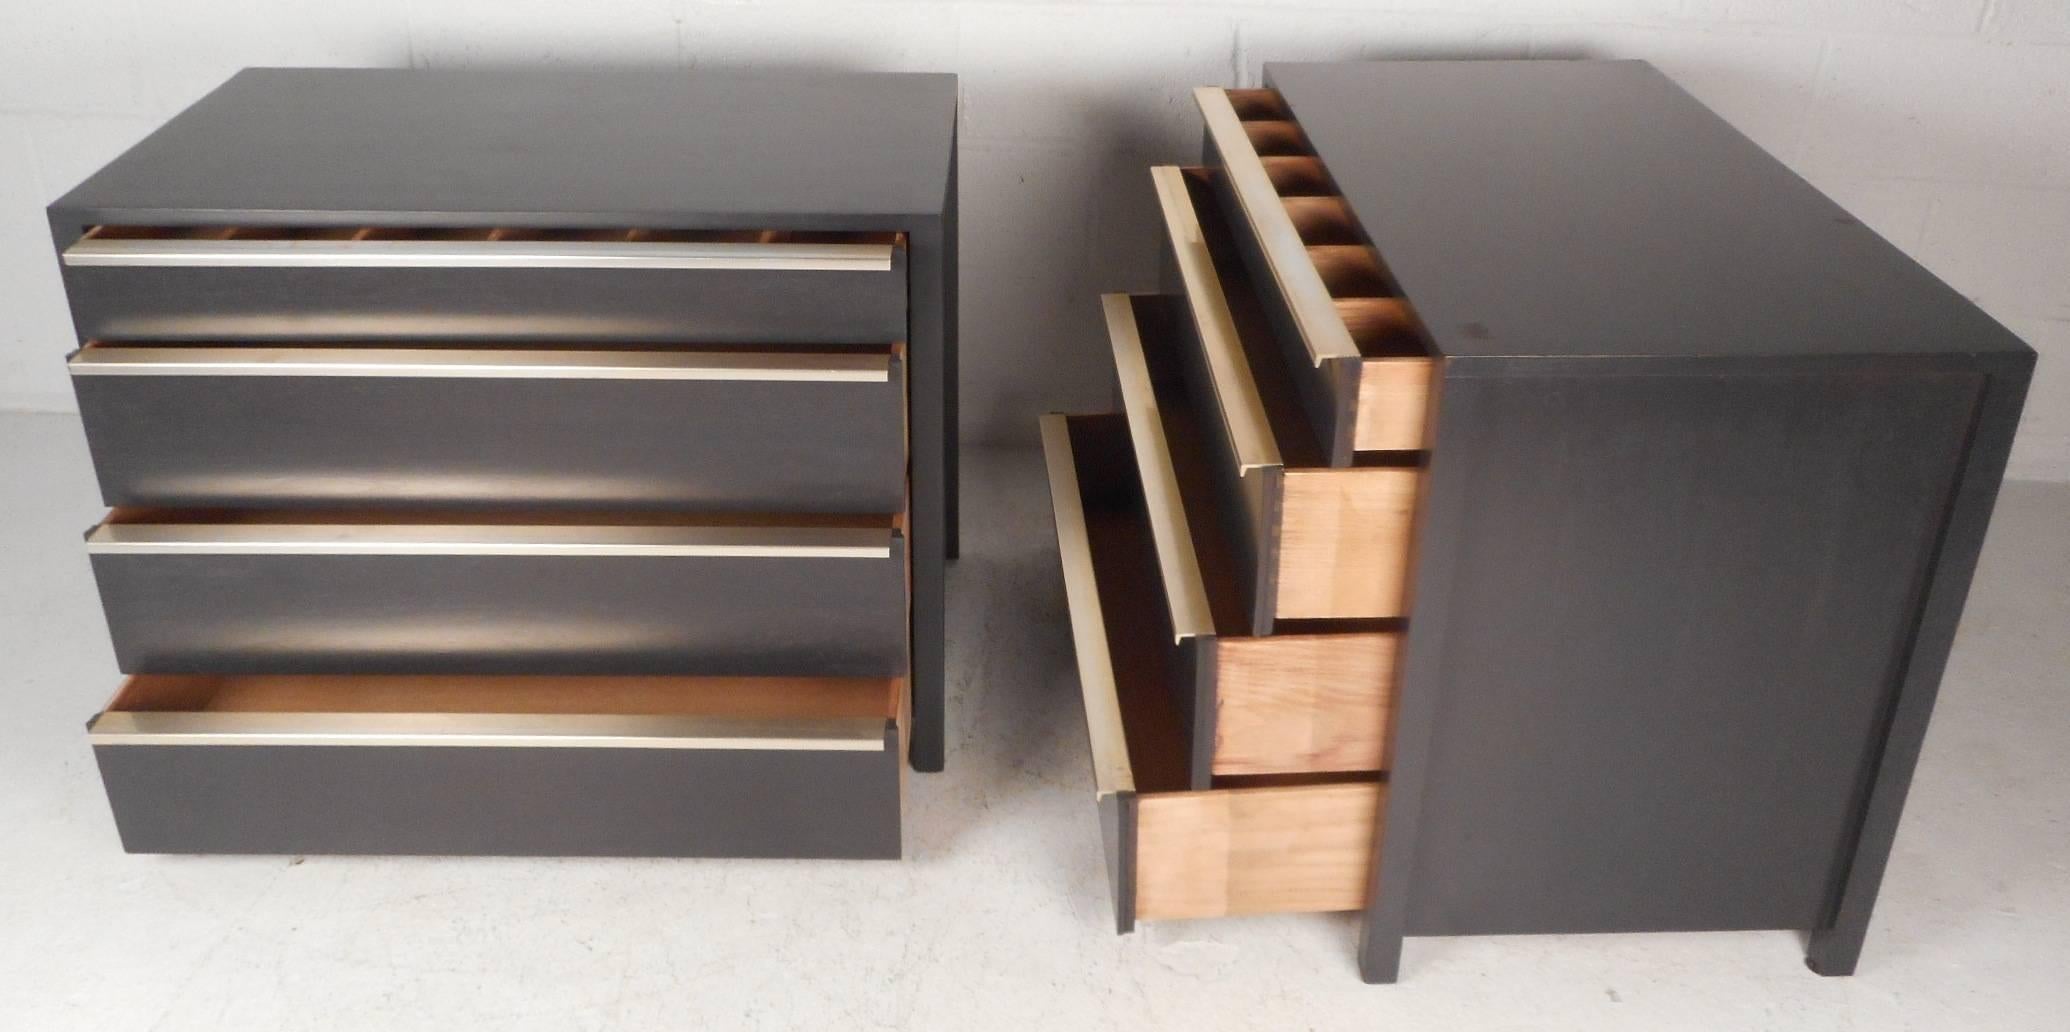 Pair of Mid-Century Modern Ebonized Chests in the Style of George Nelson 1